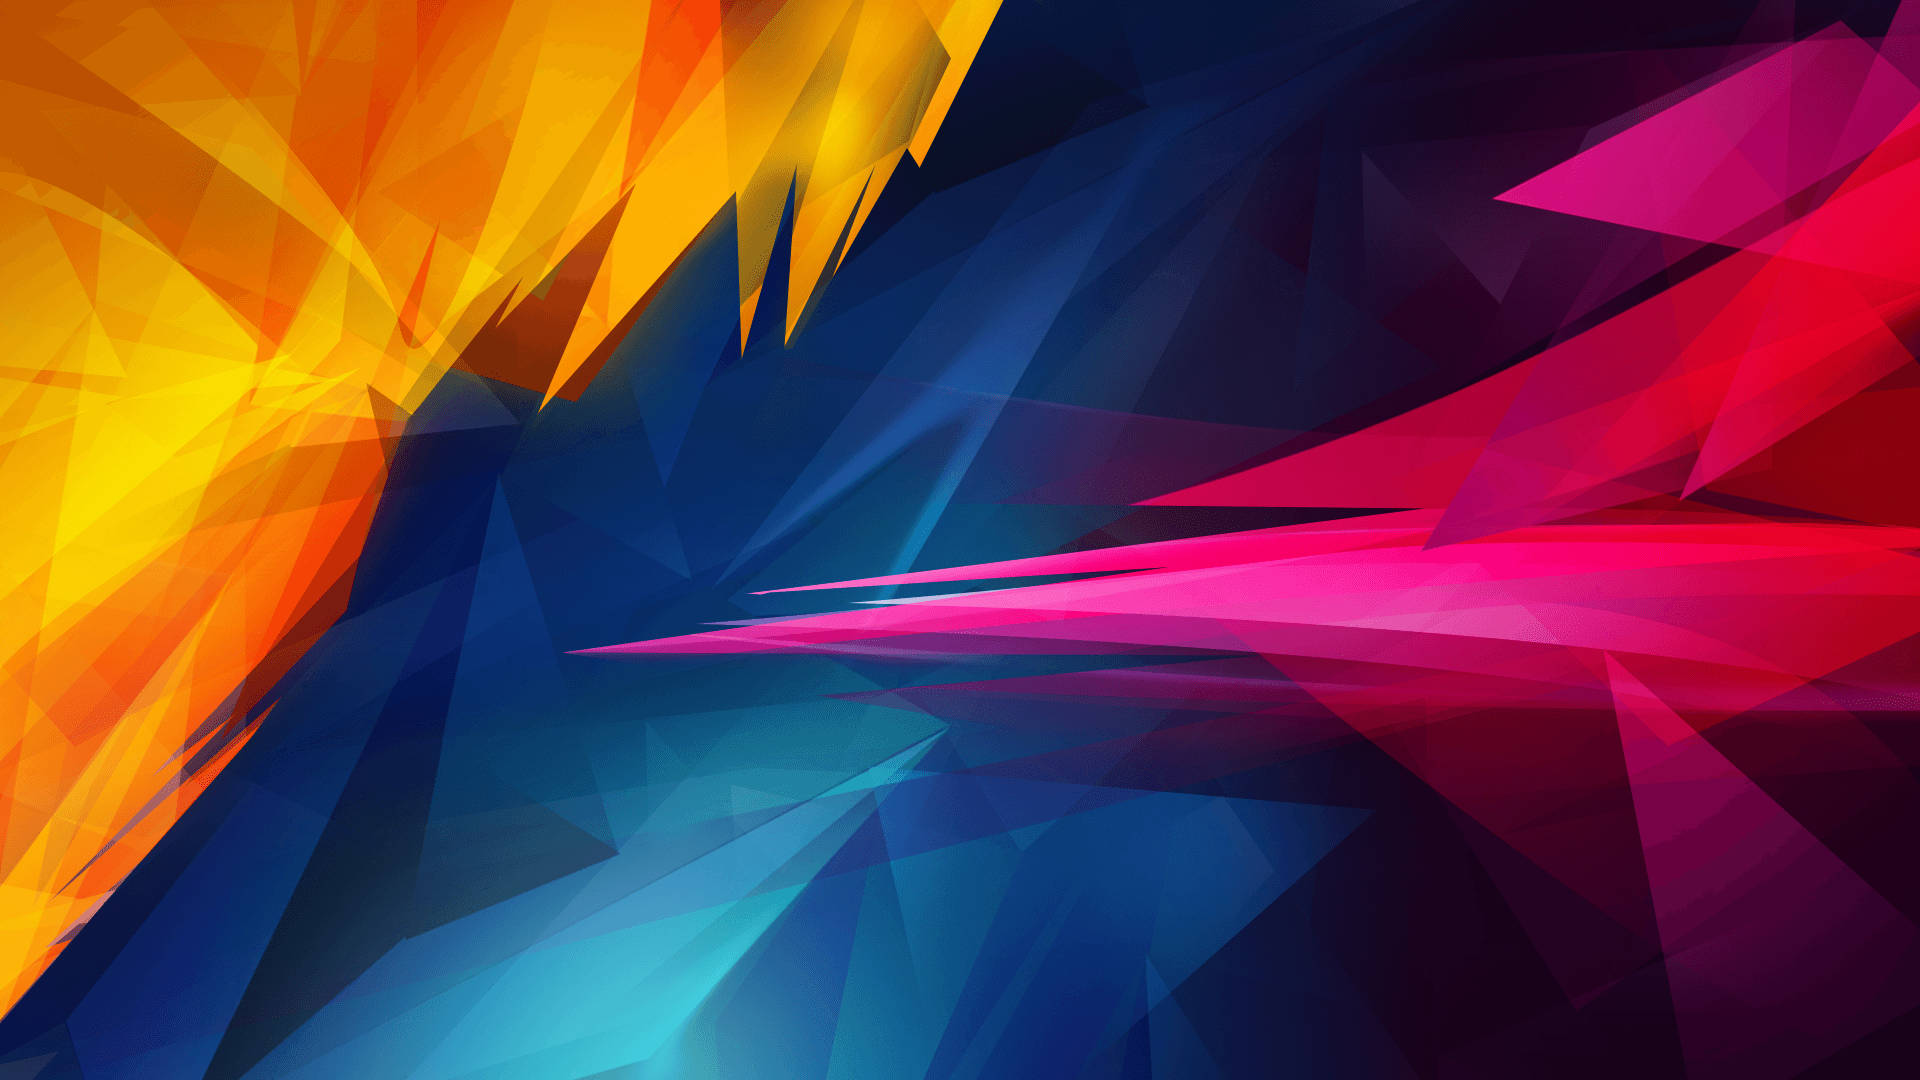 1600+] Abstract Wallpapers 